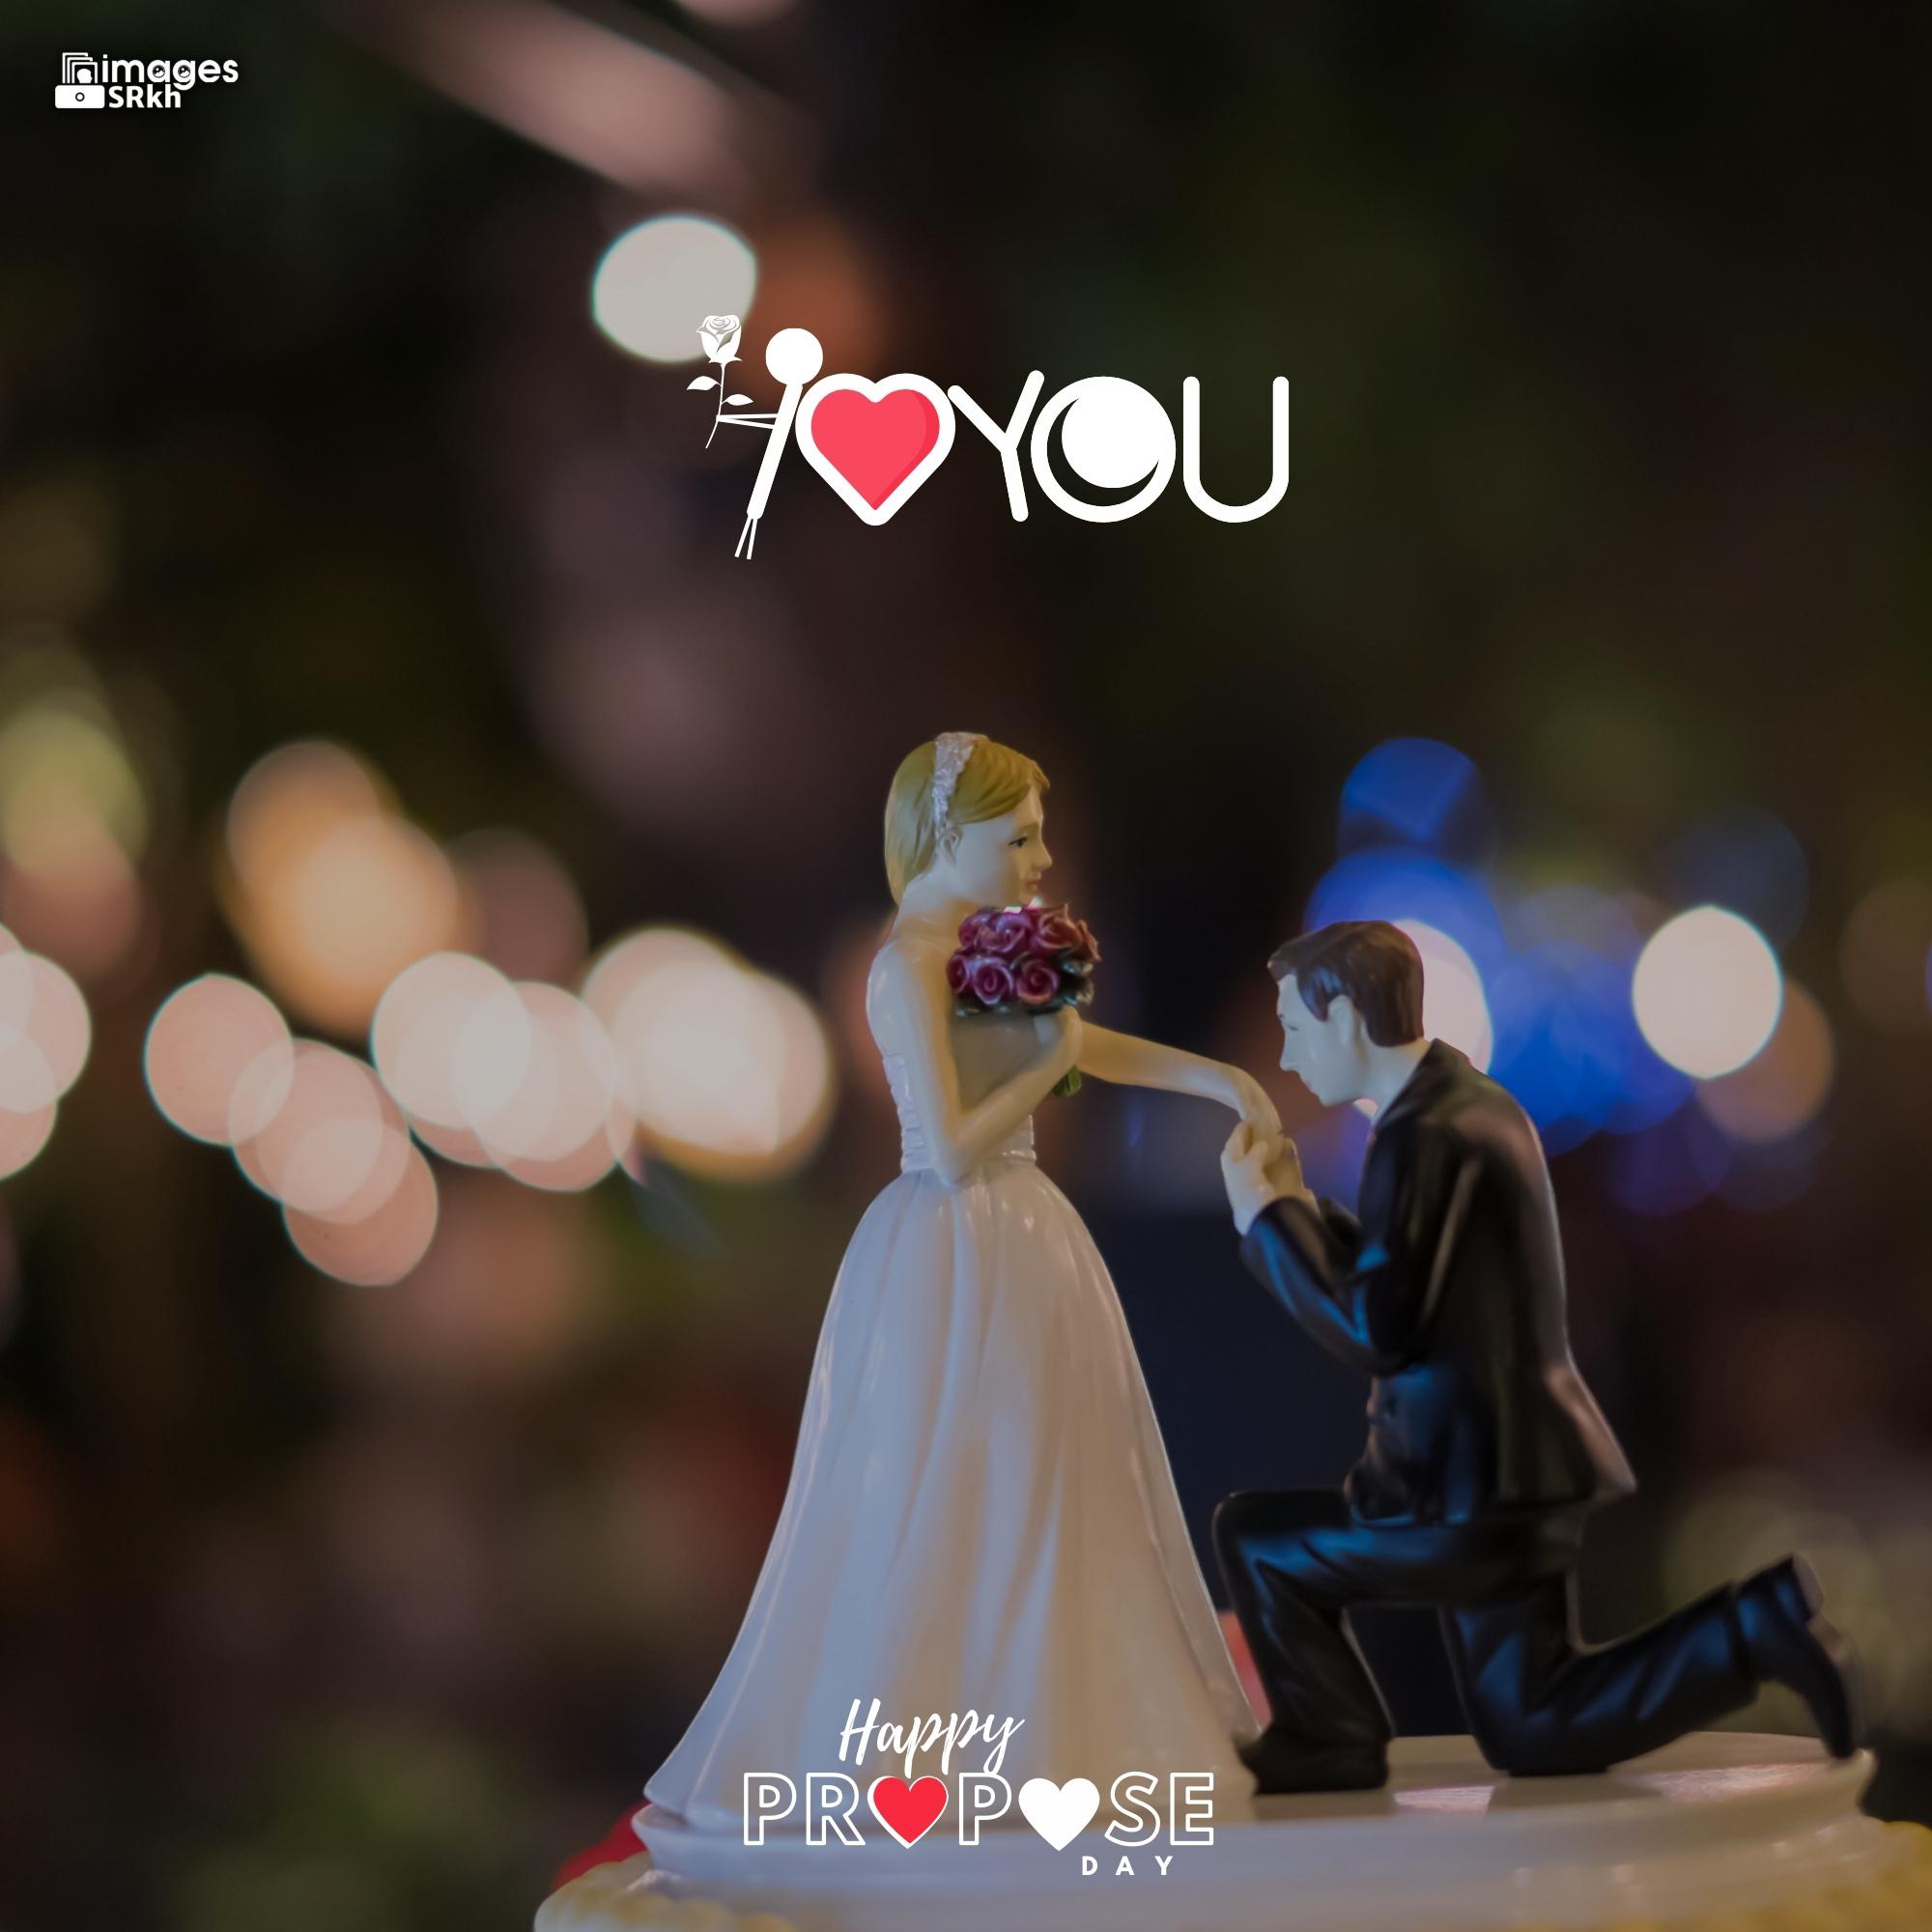 Happy Propose Day Images | 330 | I LOVE YOU